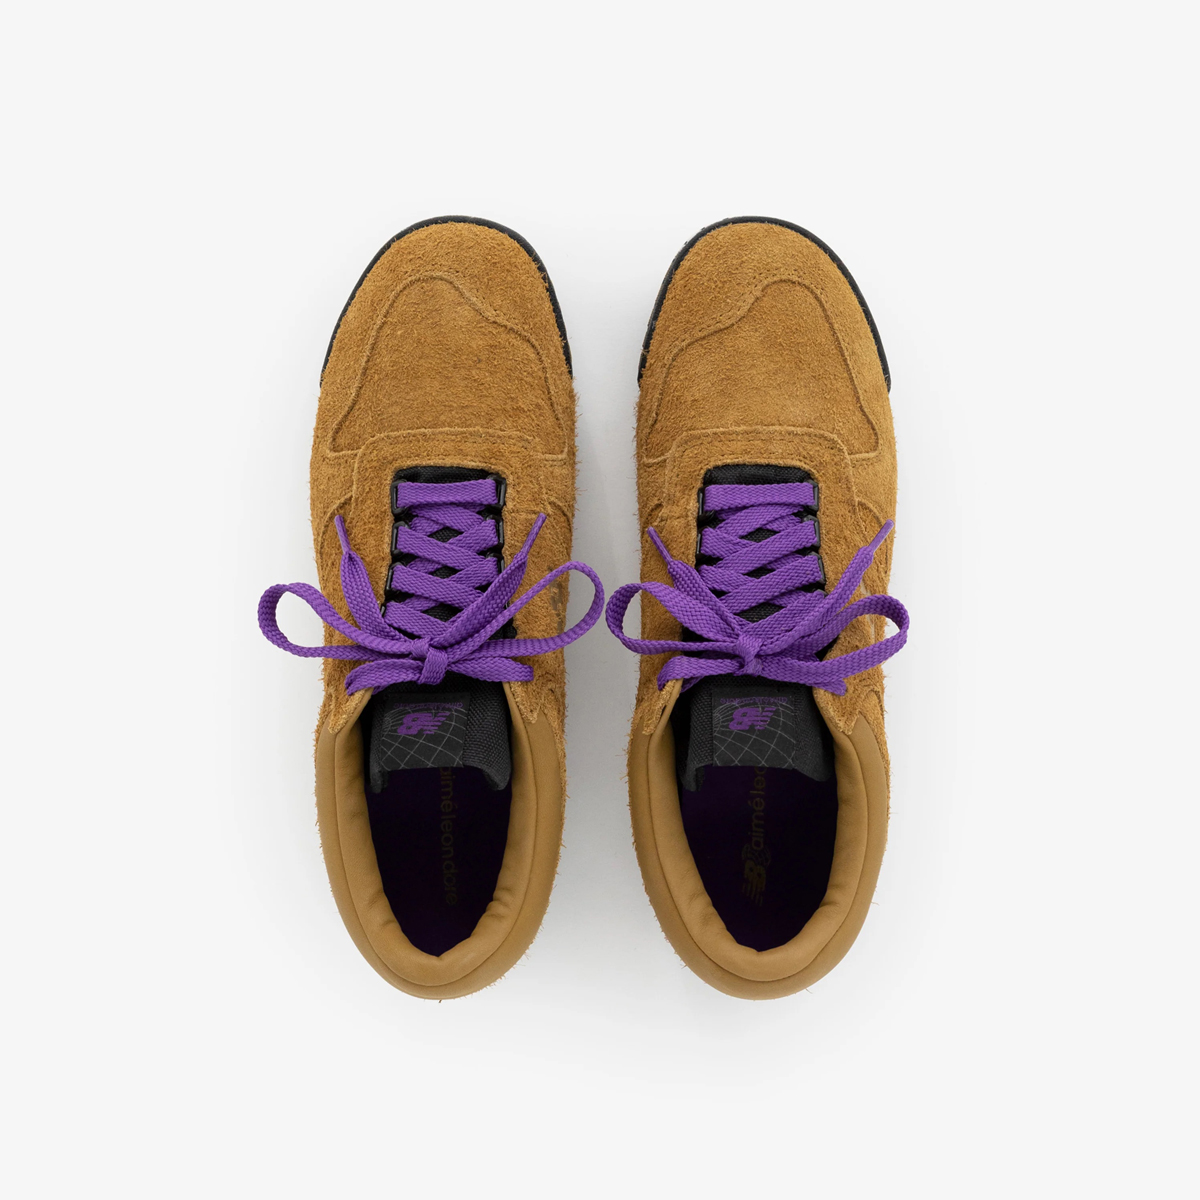 Aime Leon Dore Aries Officially Reveal Their New Balance 991 Duo Brown Purple 3